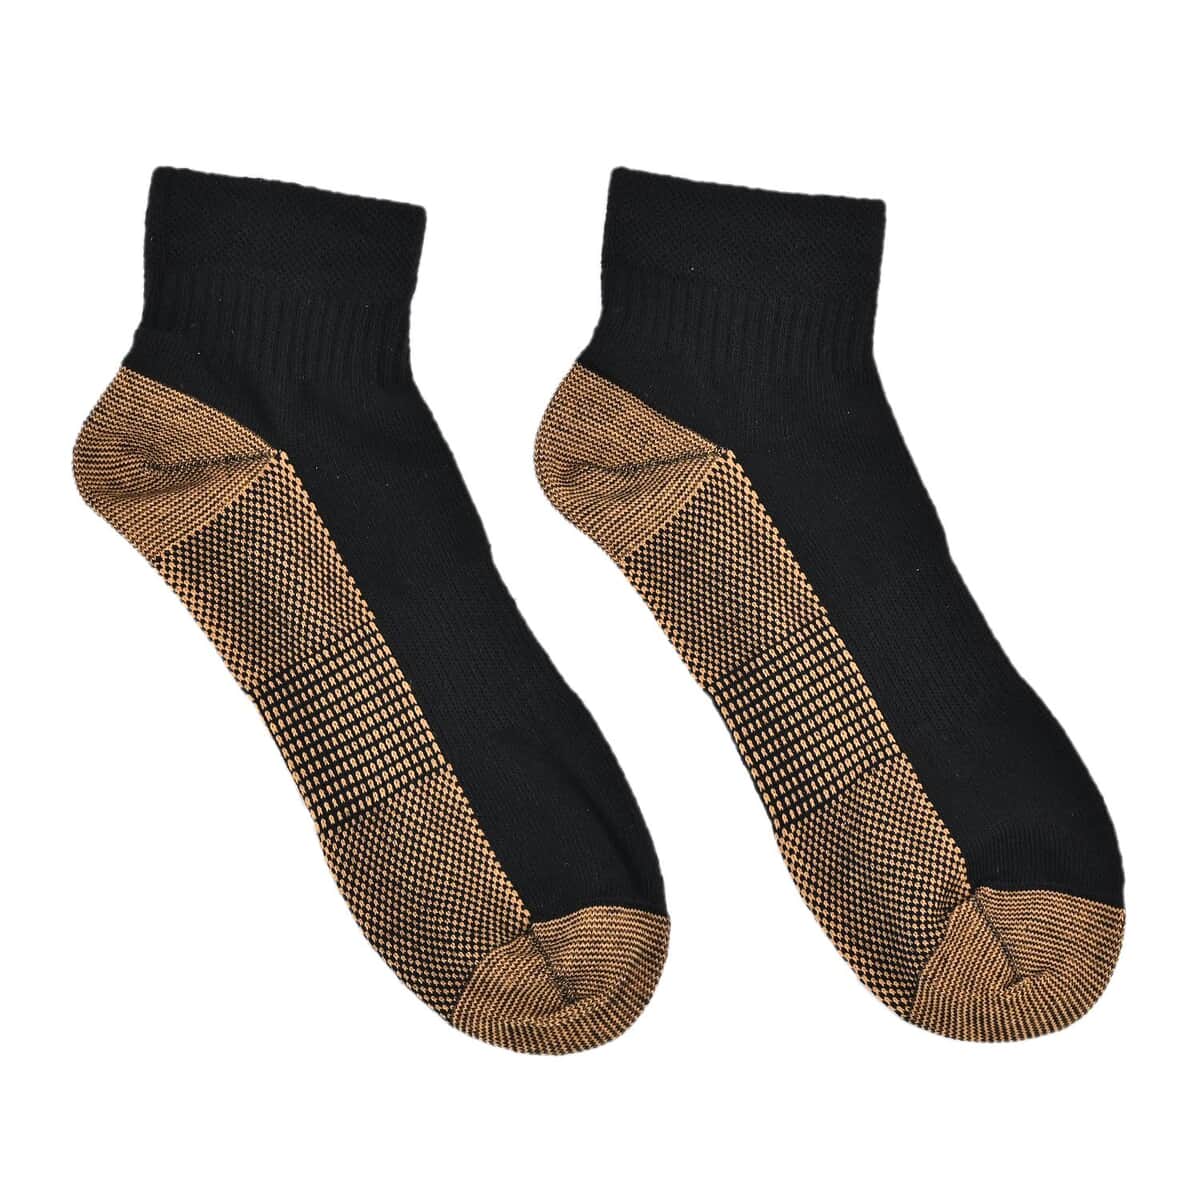 Set of 4 Pairs Ankle Length Copper Infused Compression Socks - Black (S/M) image number 1